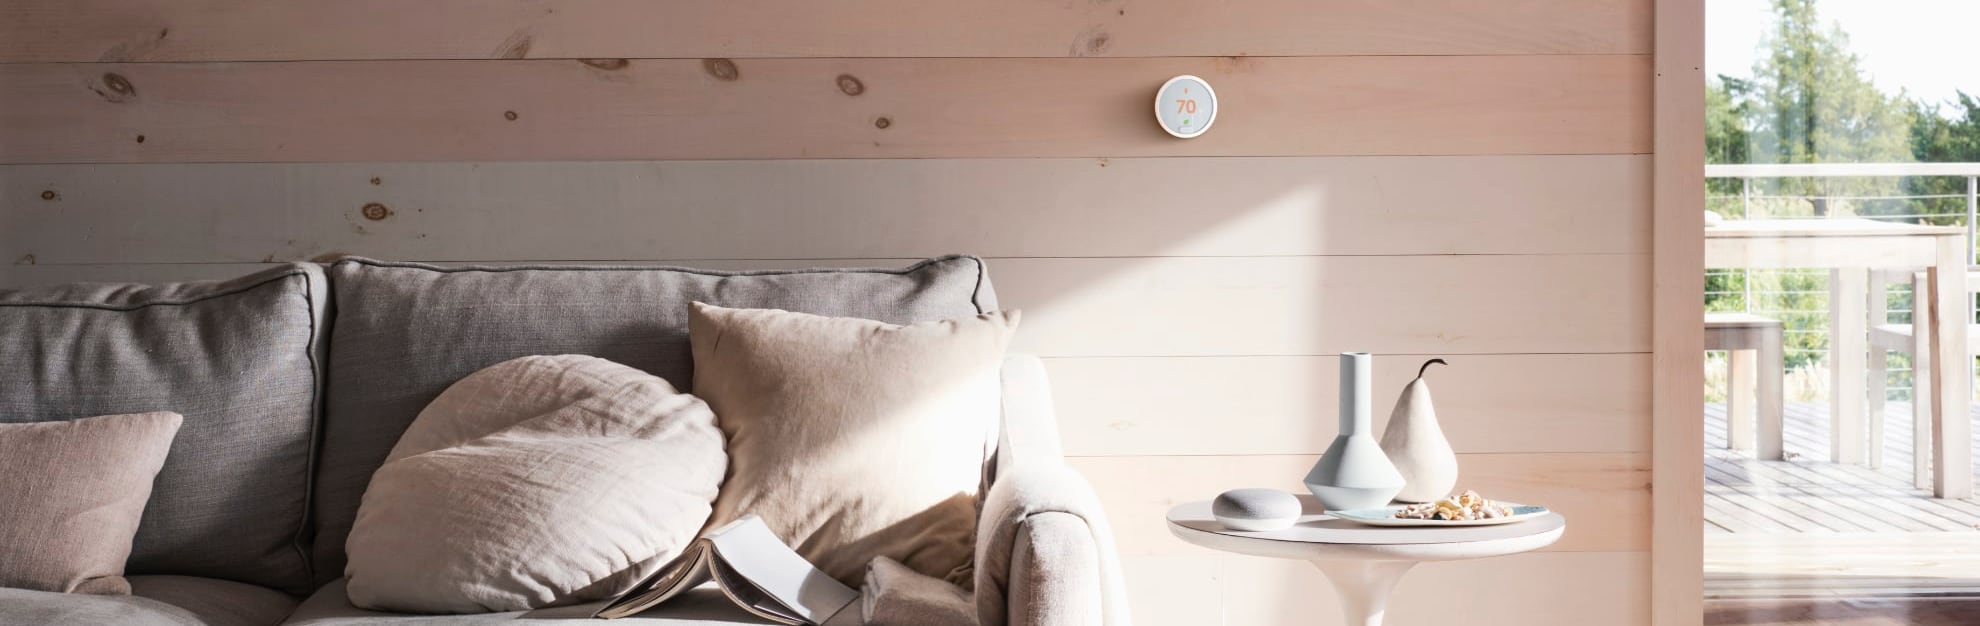 Vivint Home Automation in Chattanooga